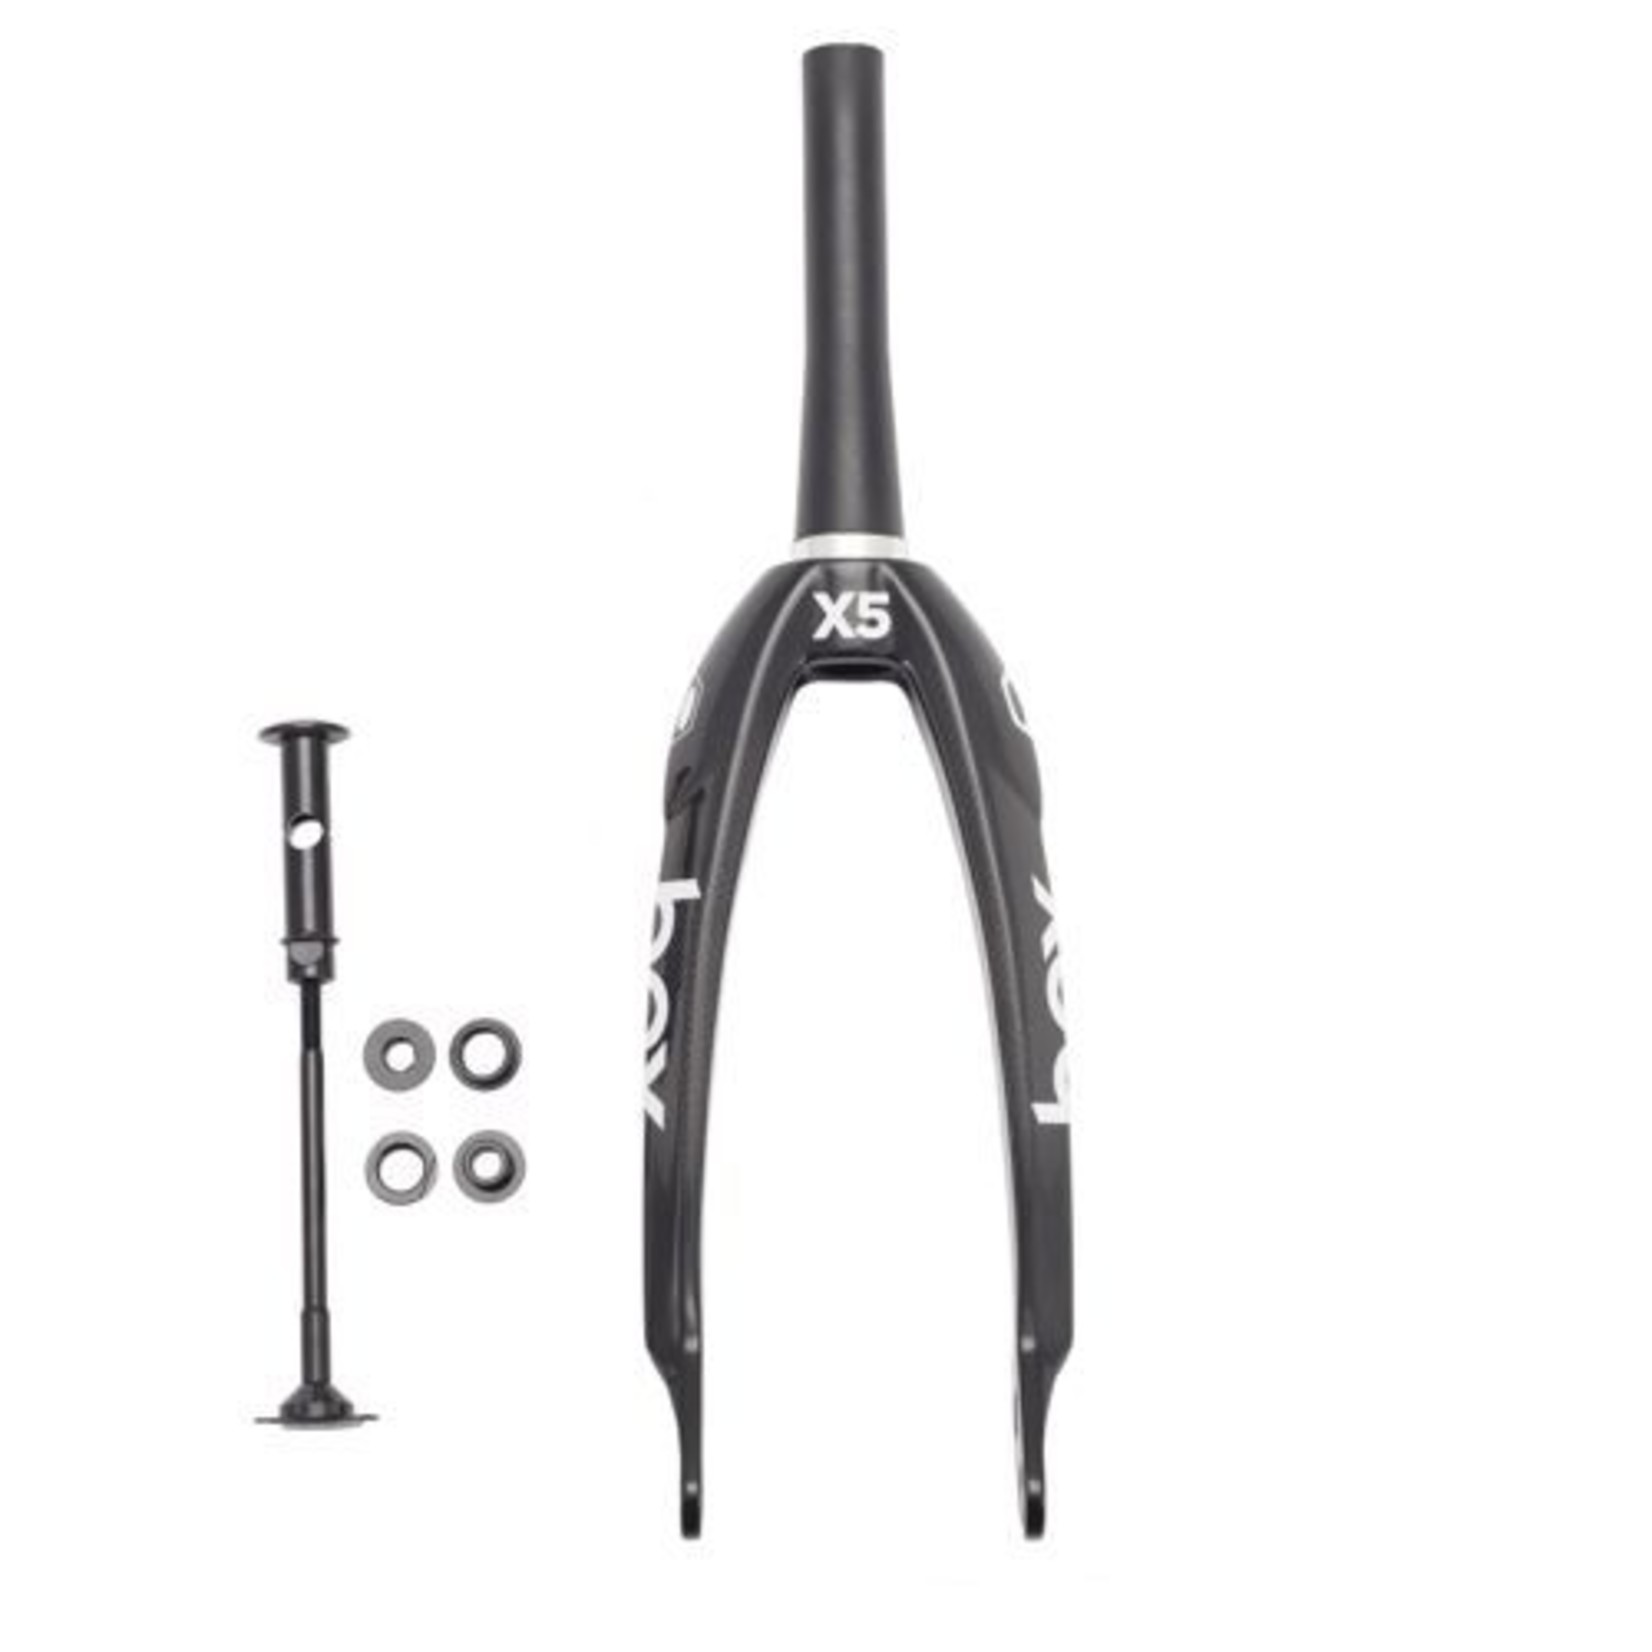 Box Components Box One Pro X5 Carbon Fork 20x20'' - 1.5 to 1 1/8"